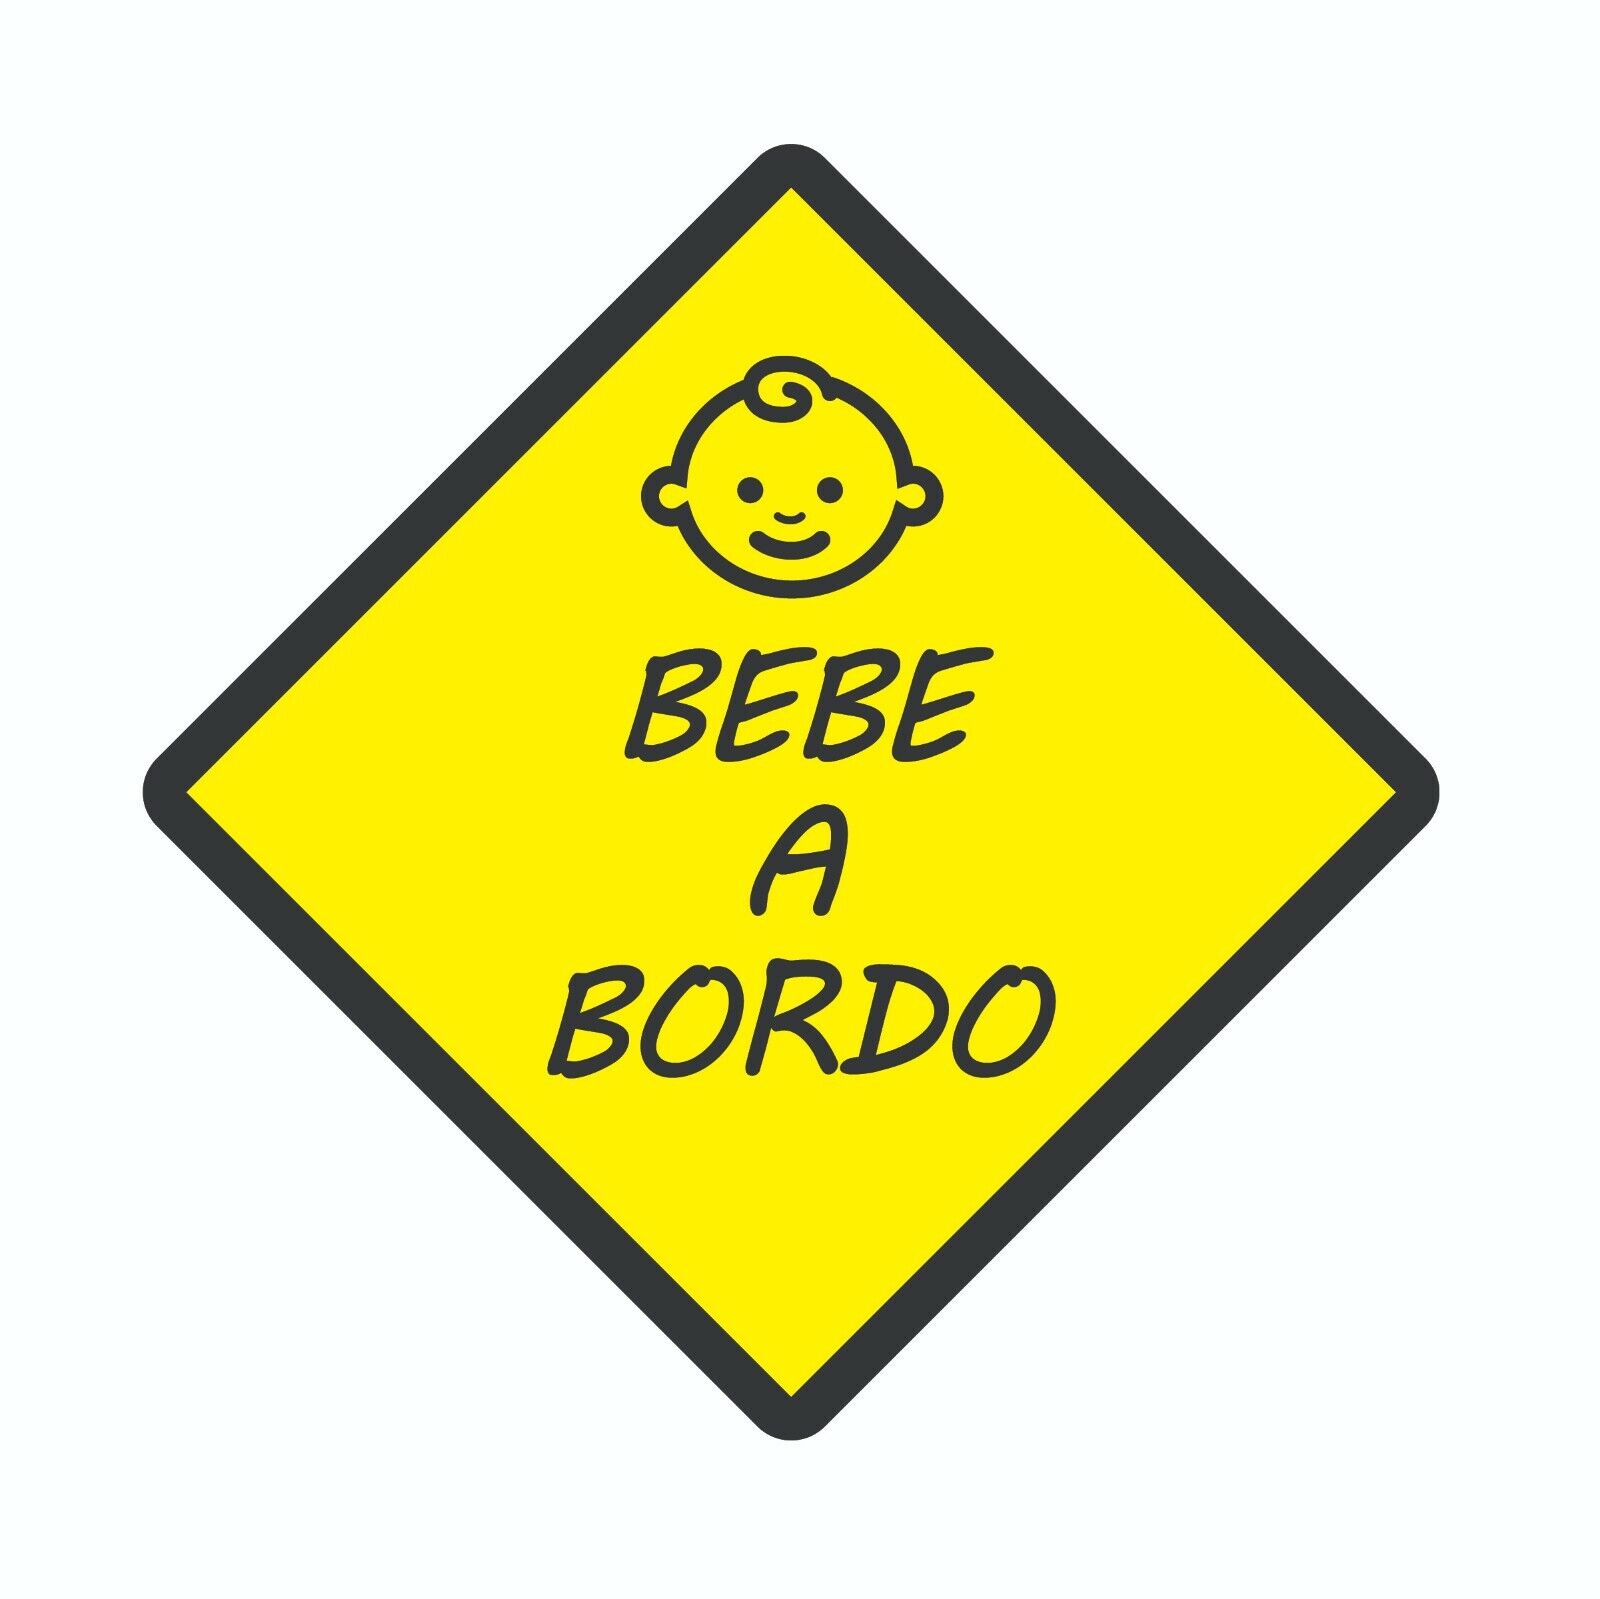 Baby On Board : Decal&Sticker Combo, Spanish, LOW PRICE, FREE SH